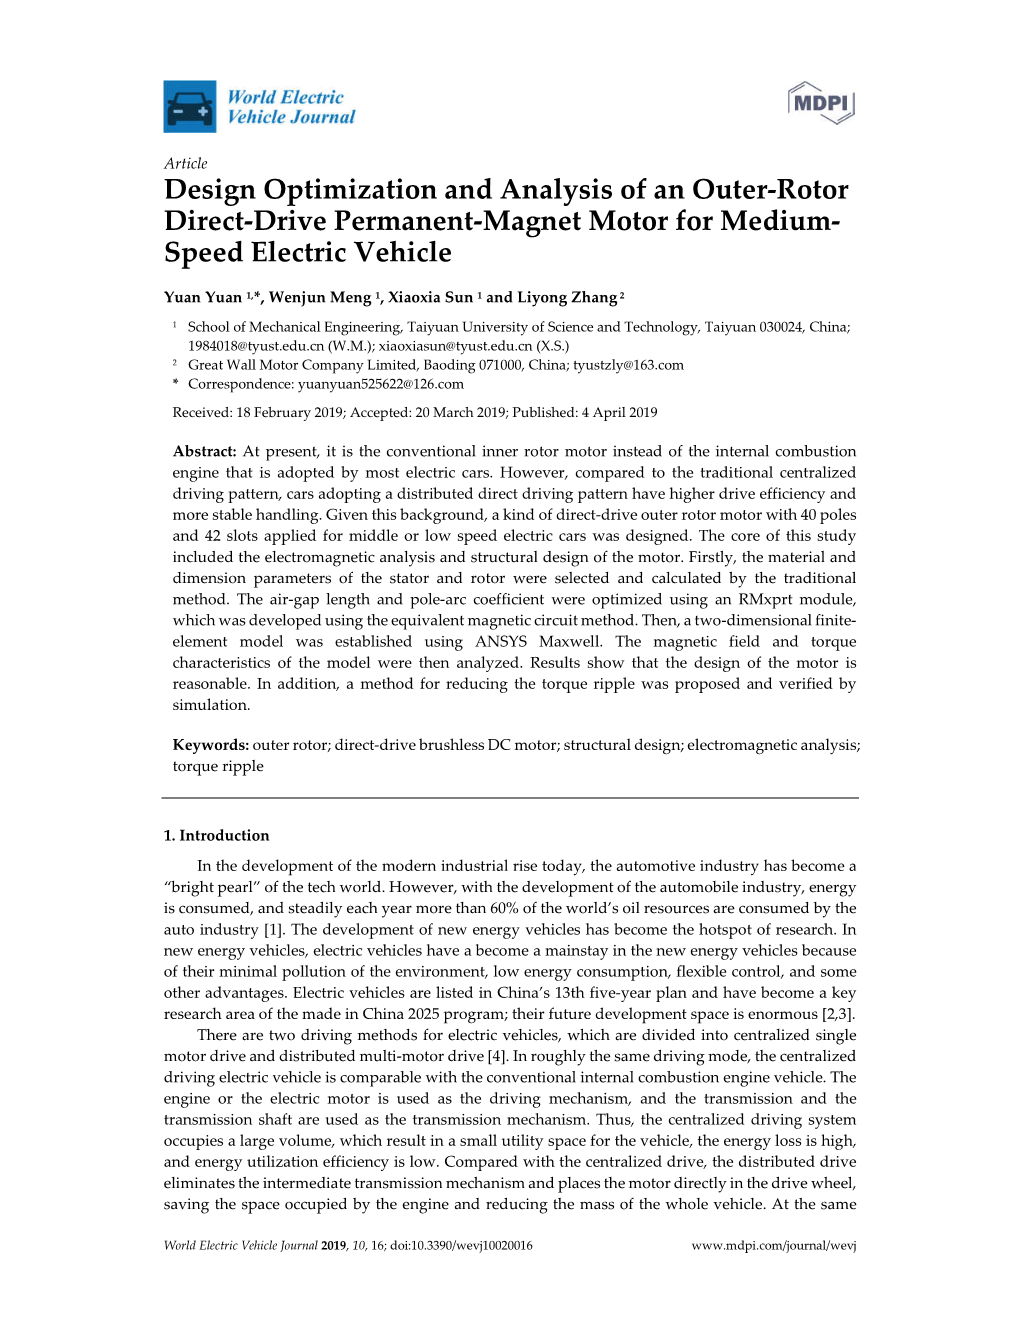 Design Optimization and Analysis of an Outer-Rotor Direct-Drive Permanent-Magnet Motor for Medium- Speed Electric Vehicle